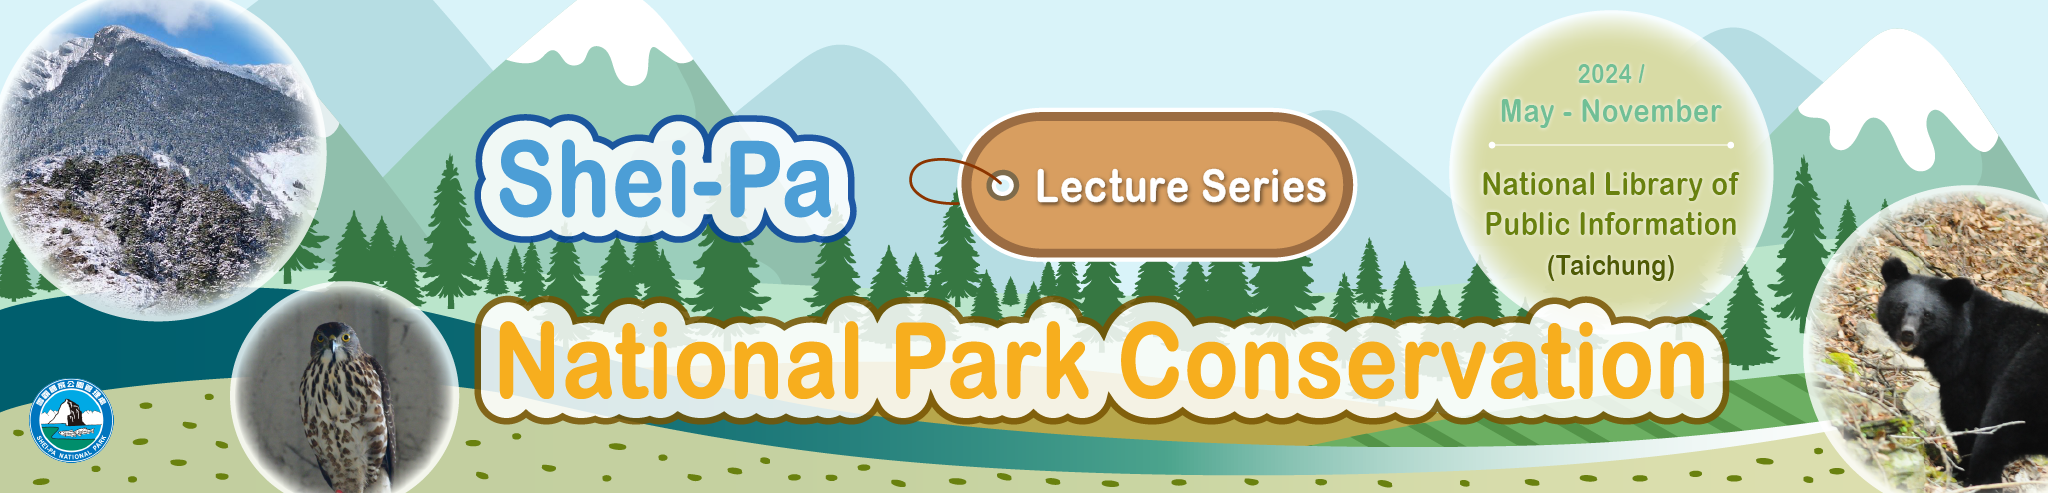 Shei-Pa National Park Conservation Lecture Series